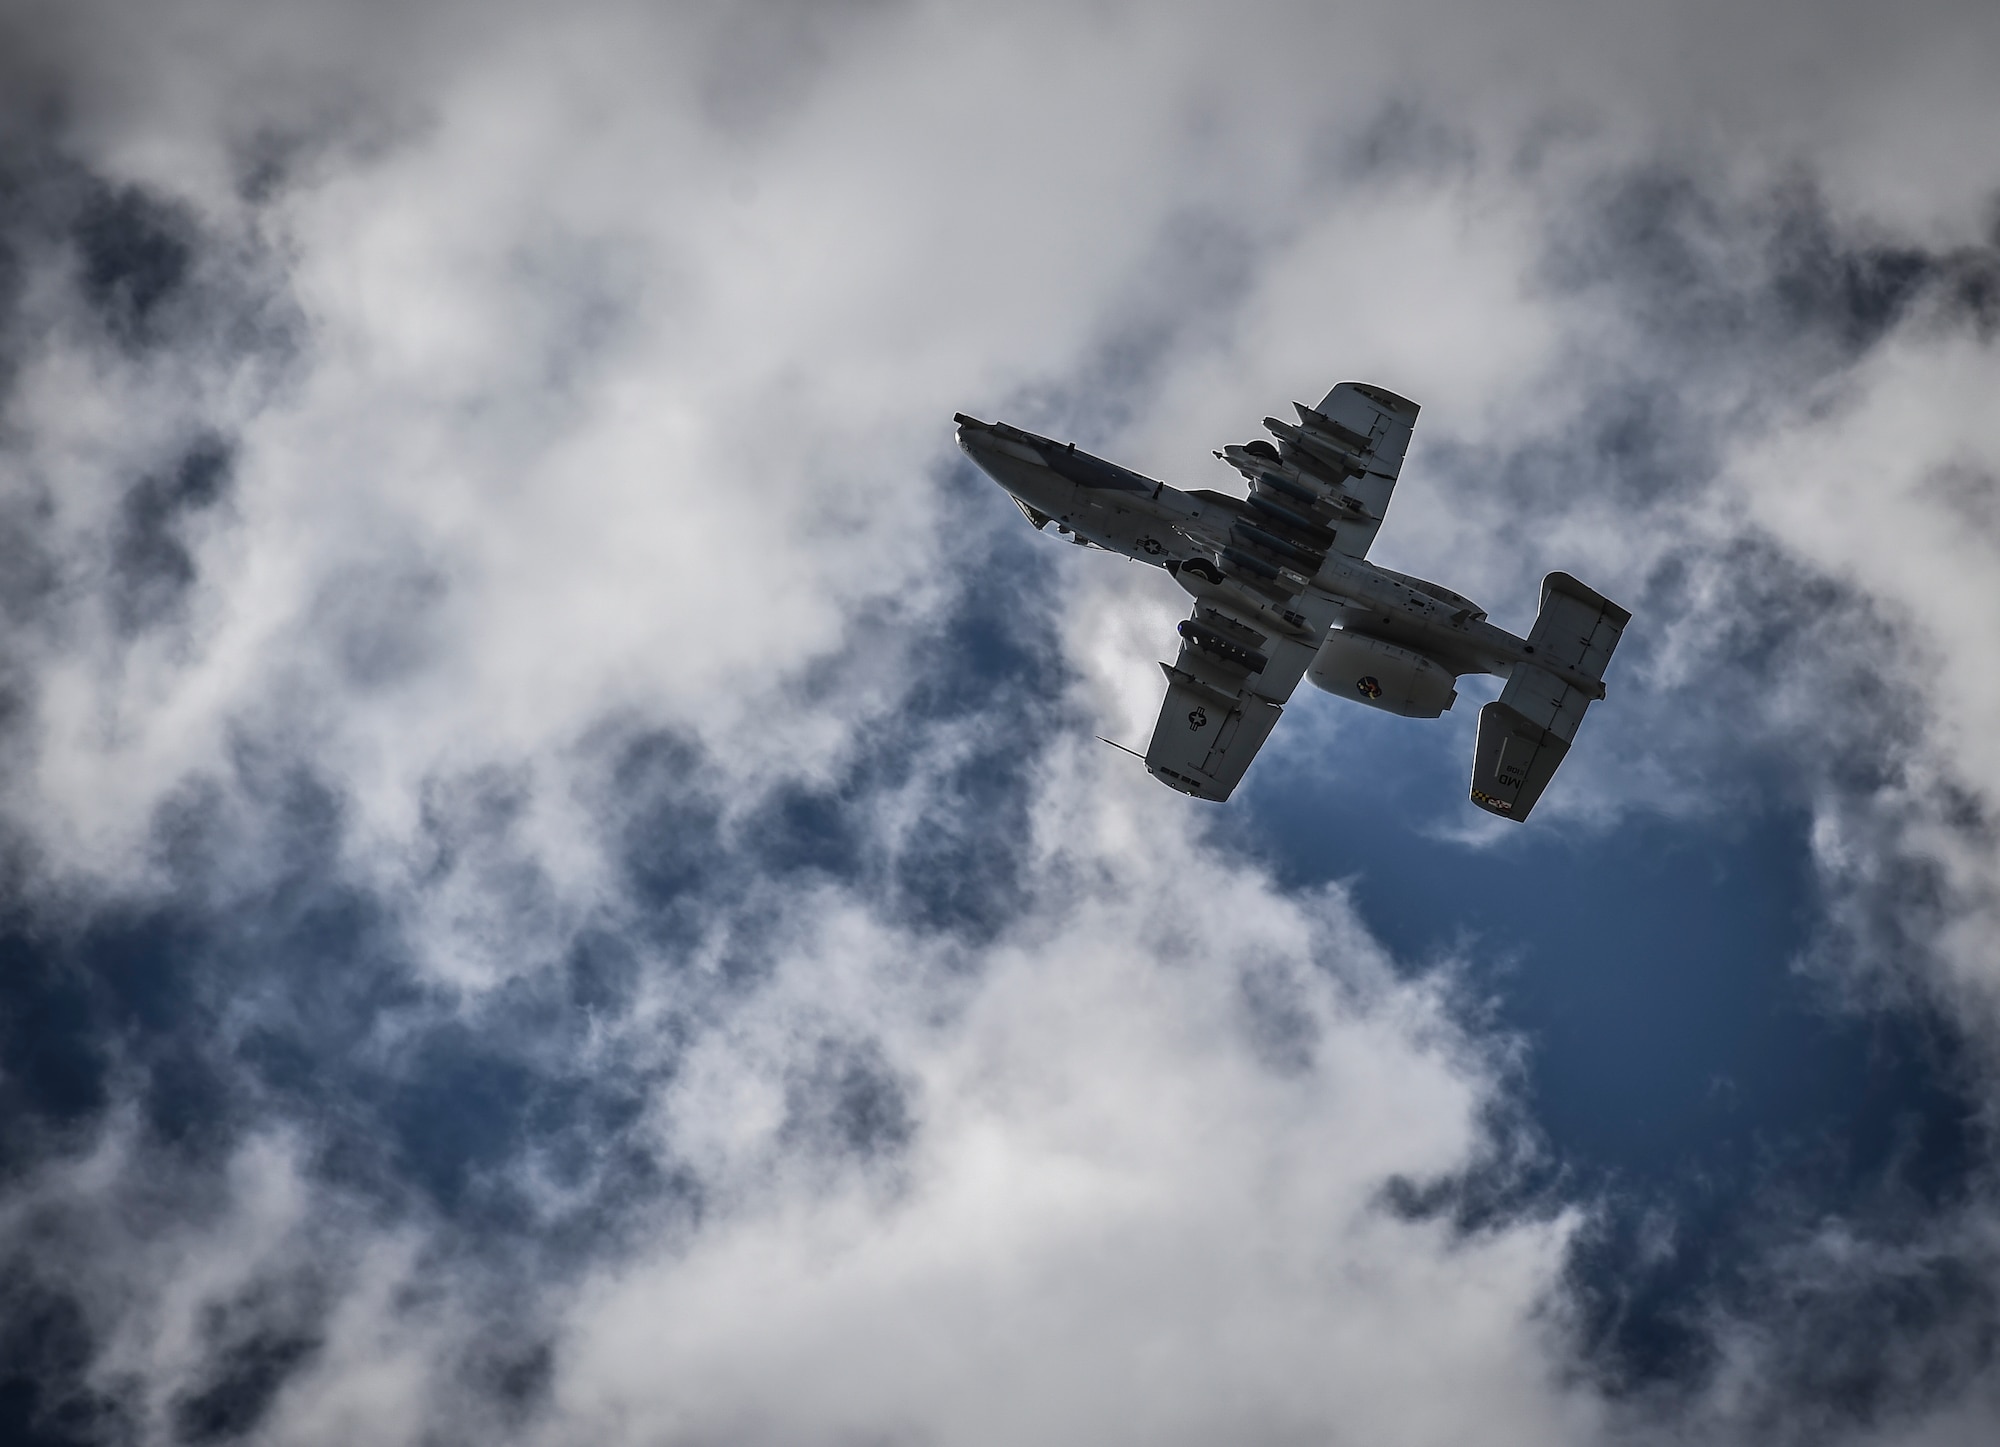 321st Special Tactics Squadron combat controllers simulating close air support missions in the town of Rakevere, Estonia, during a flying training deployment in support of Operation Atlantic Resolve.